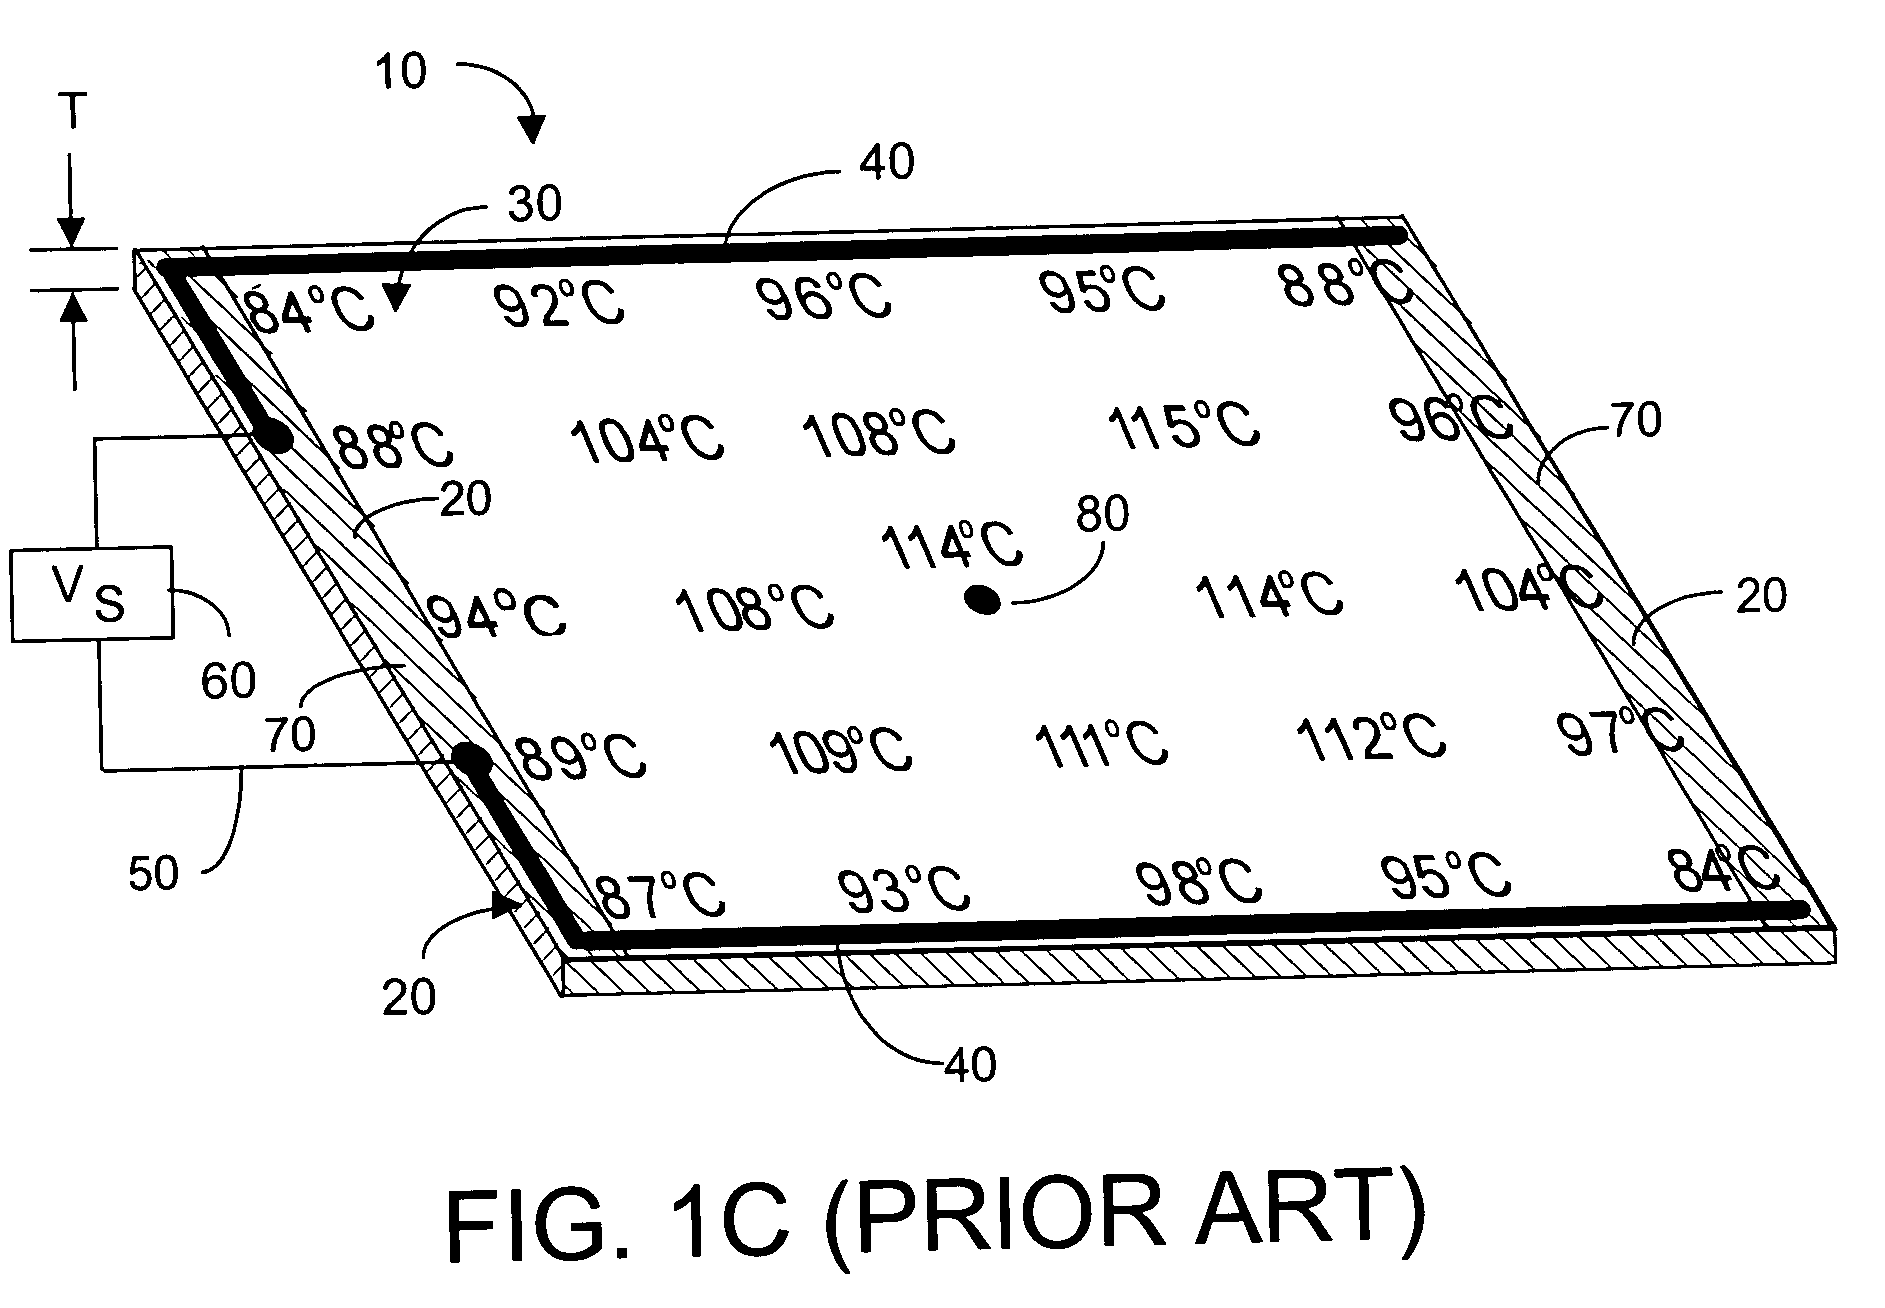 Structure and method to compensate for thermal edge loss in thin film heaters